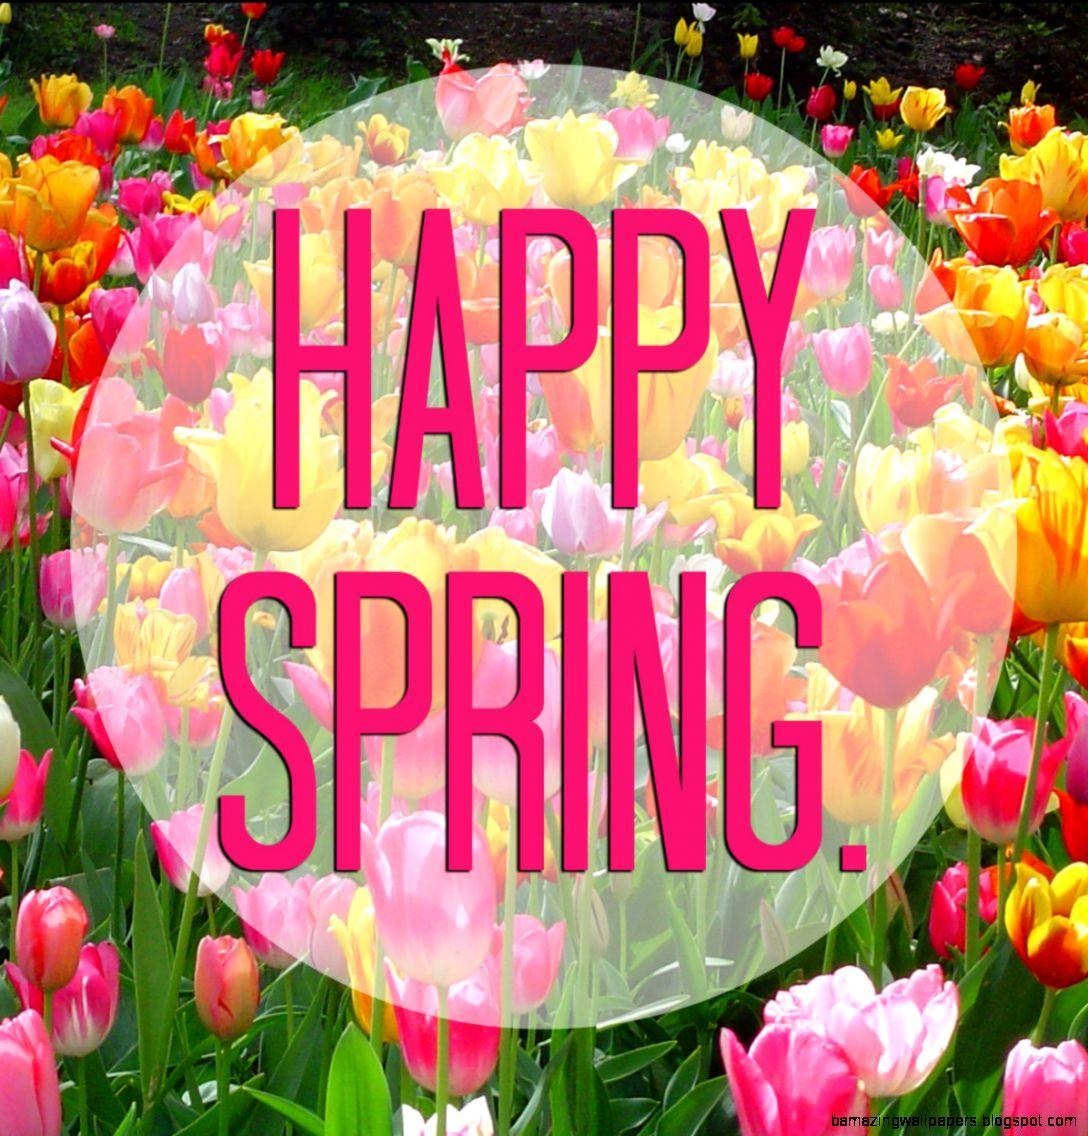 Happy First Day Of Spring Image